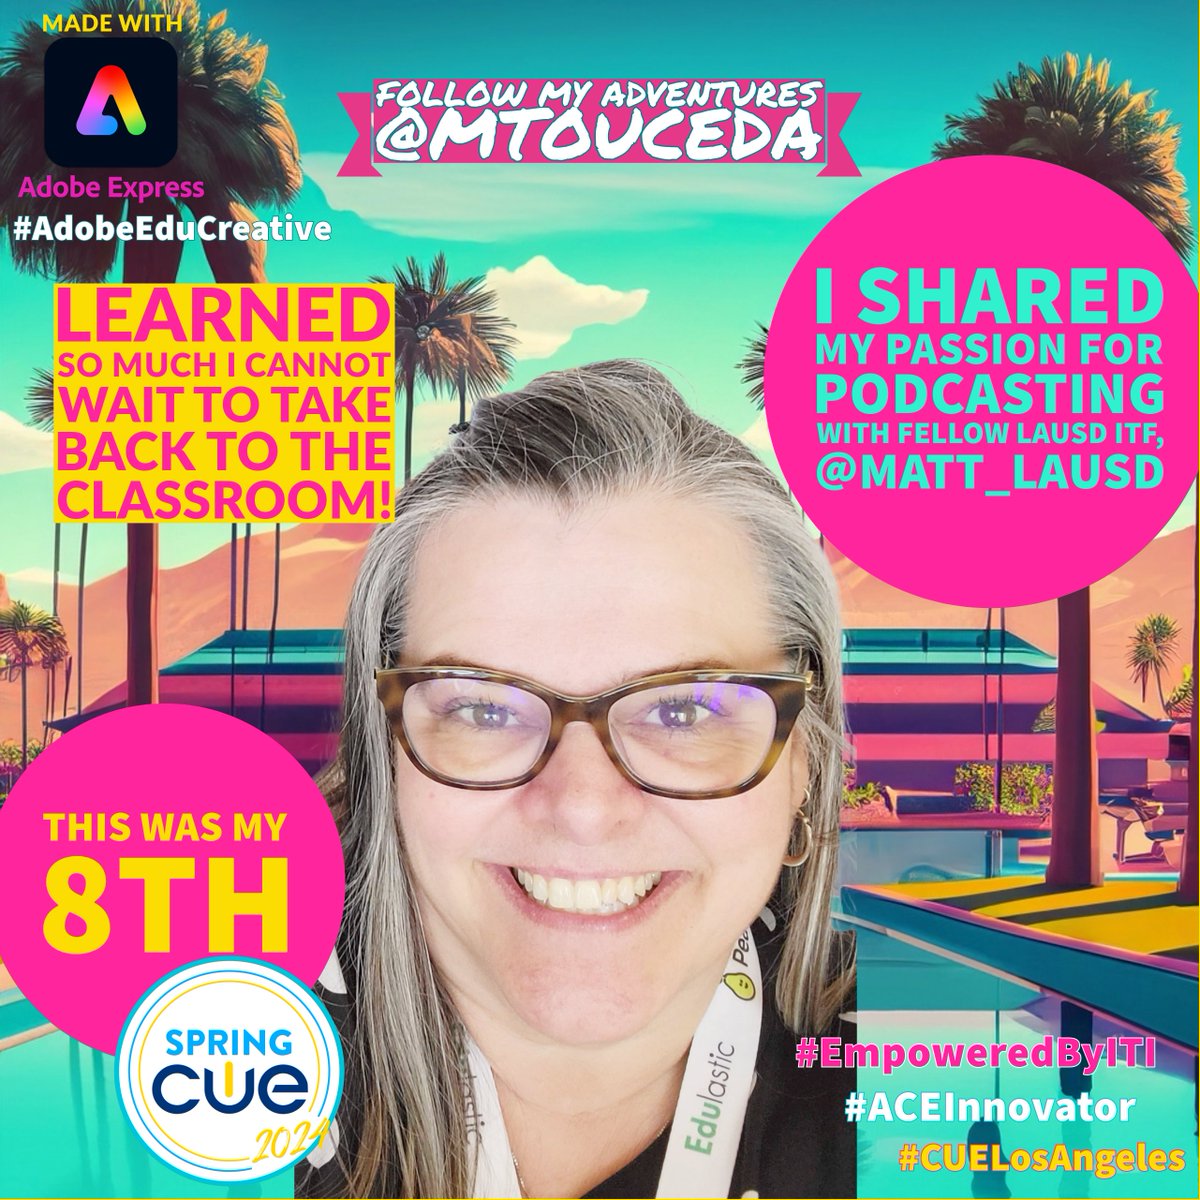 Instead of being a calling card, my @AdobeExpress #SpringCue graphic ended up being a reflection. #AdobeEduCreative #ACEInnovator #EmpoweredByITI #CUE24 #CUELosAngeles #WeAreCUE #SomosCUE